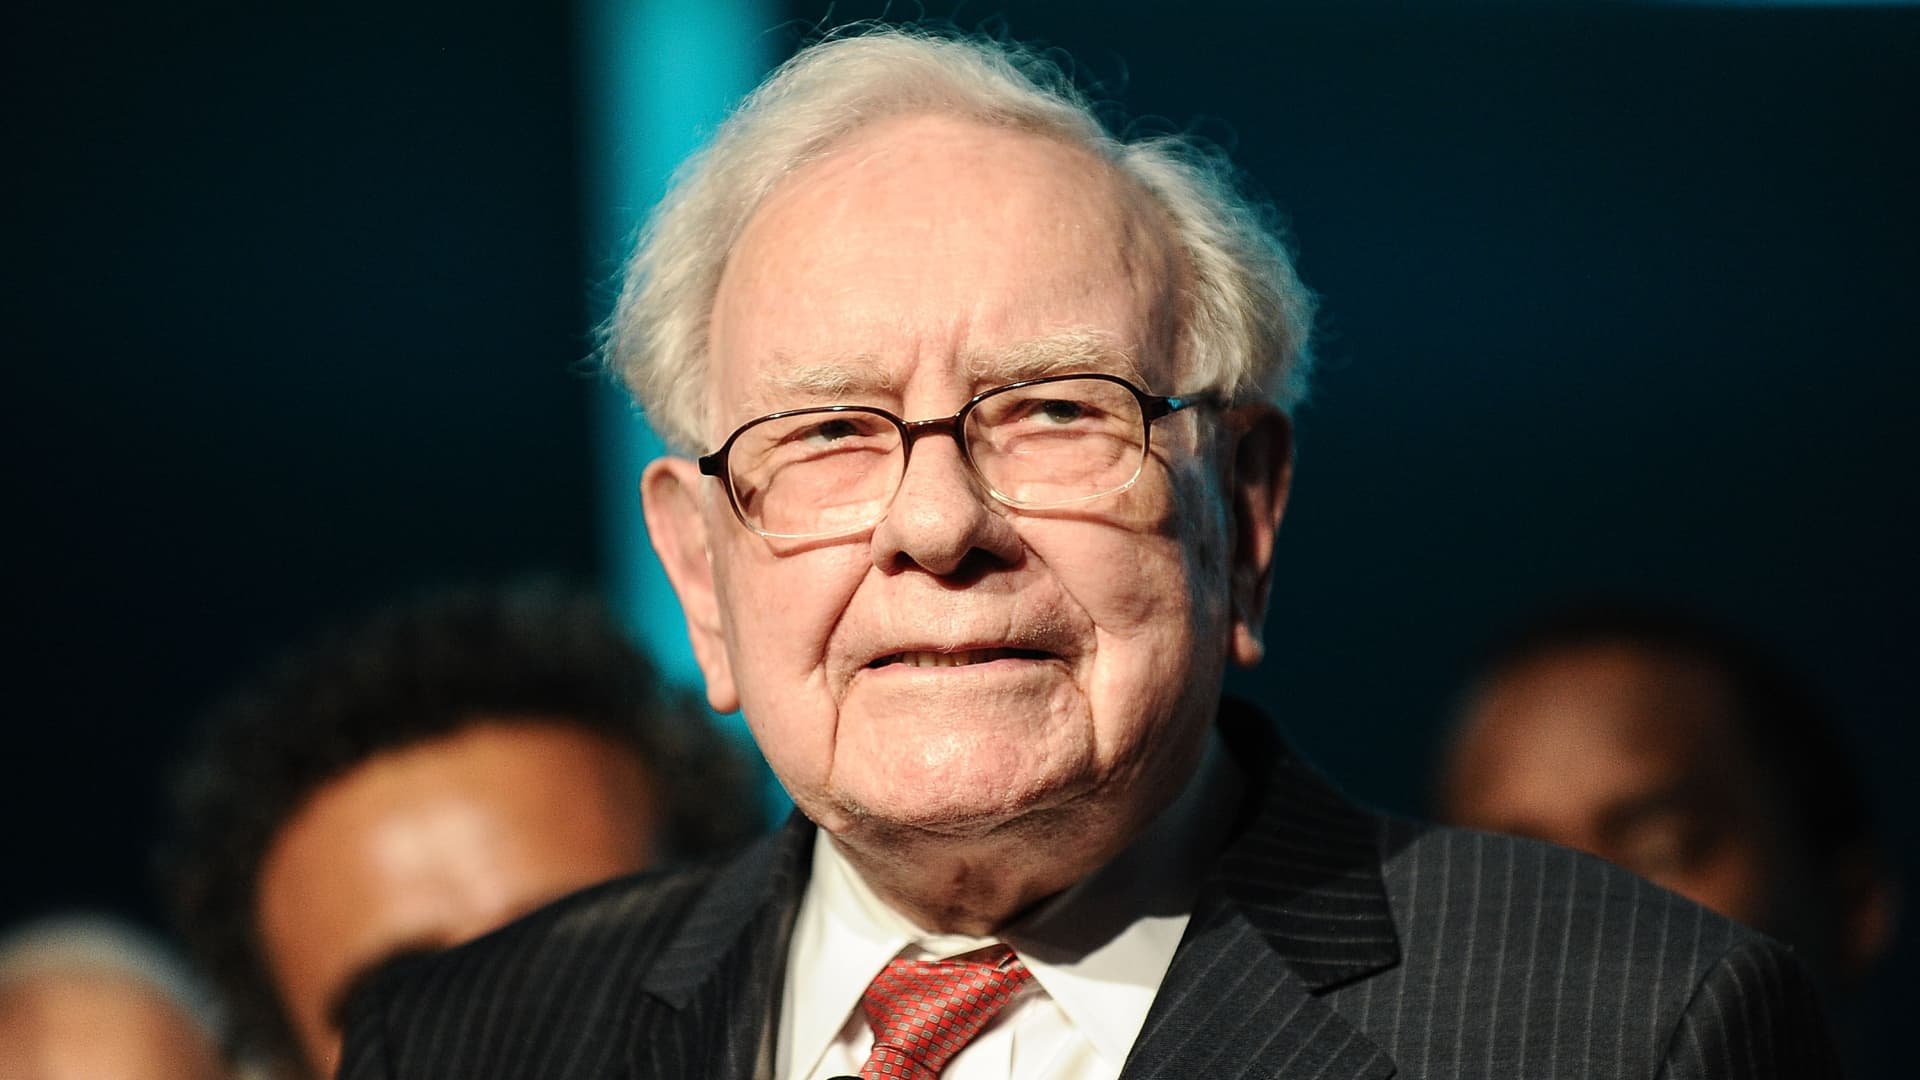 Warren Buffett scoops up another $1 billion in Occidental shares, bringing total stake to $7 billion